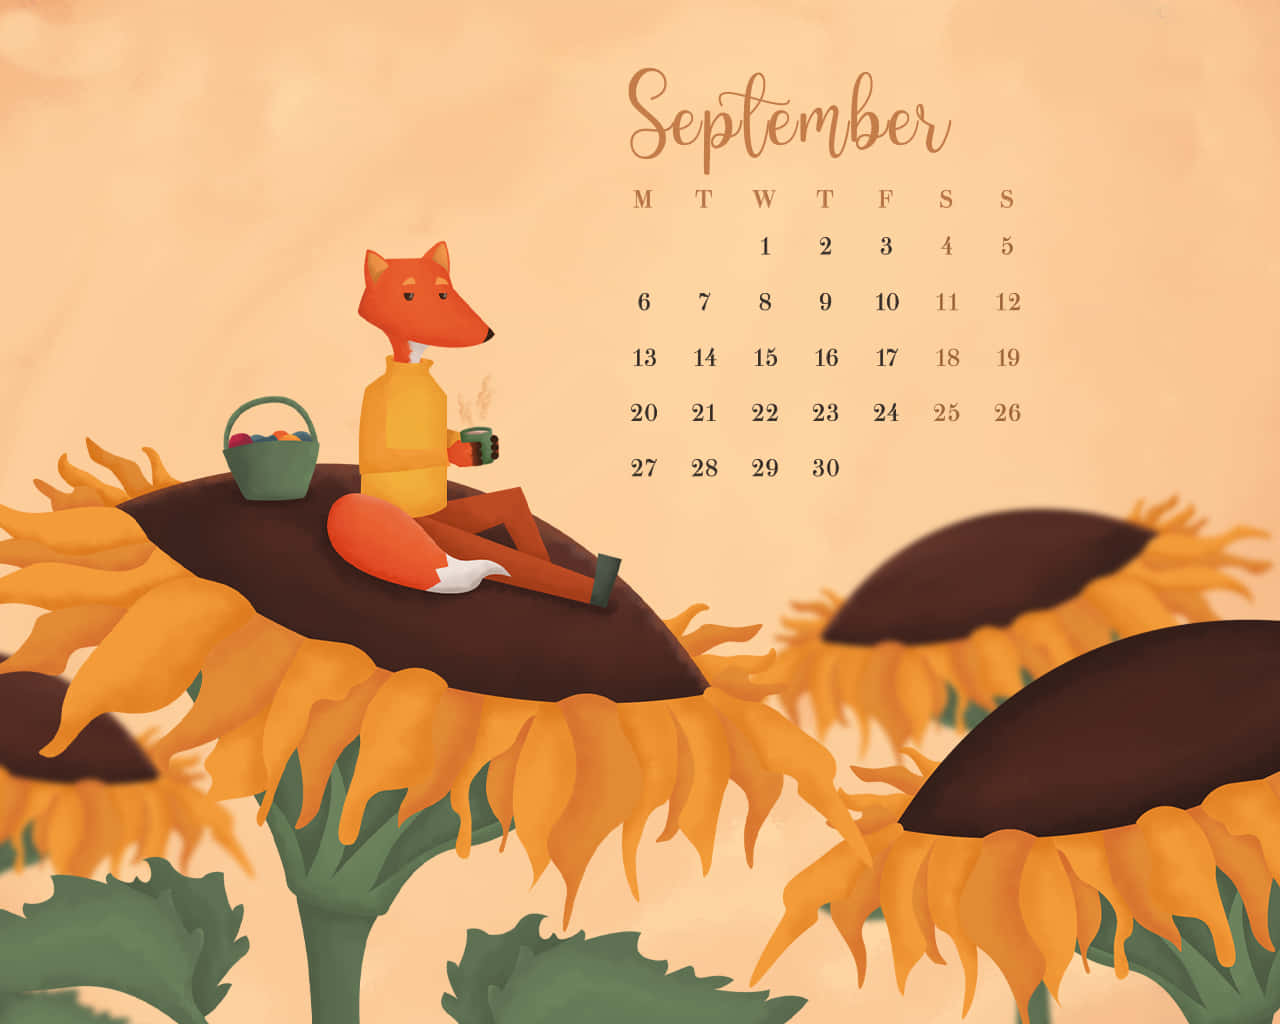 Plan ahead for September 2021 with this calendar Wallpaper